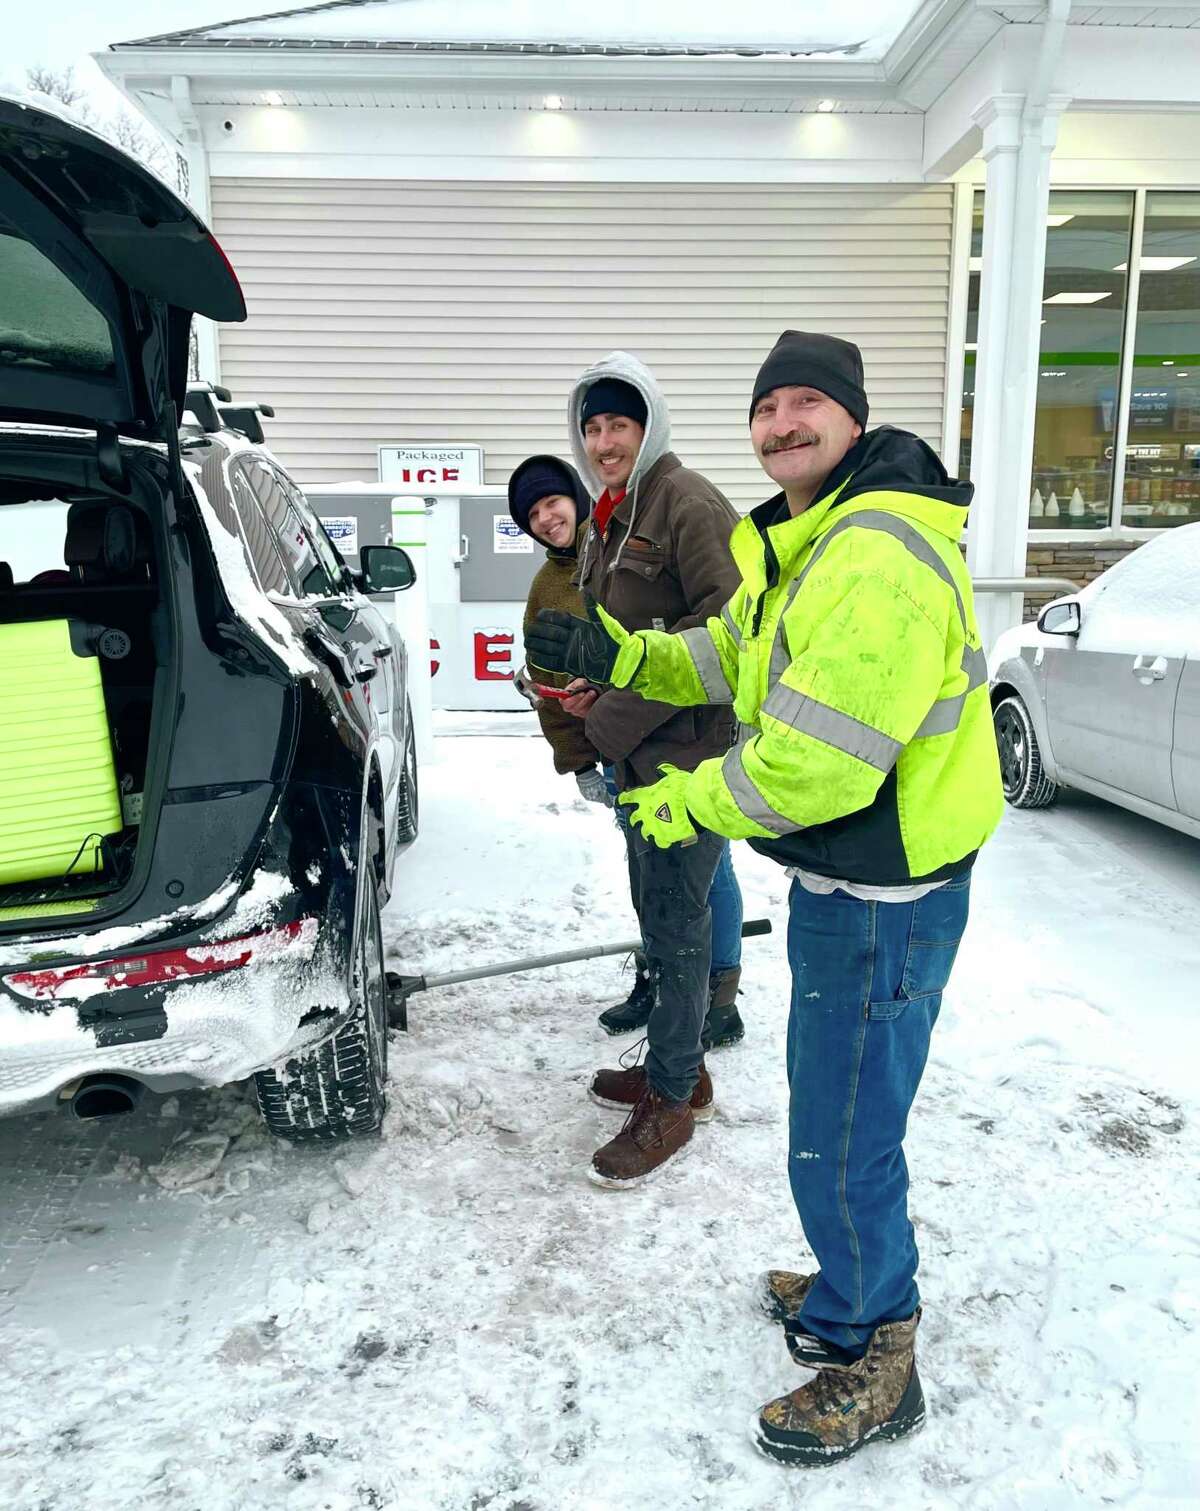 Emily and Patrick Buckland of Canton were their way to Massachusetts for the weekend with their new baby when they got a flat tire near the Cumberland Farms in Winsted. Good Samaritan, Edward Goewy of Winsted helped to fix them fix the tire.